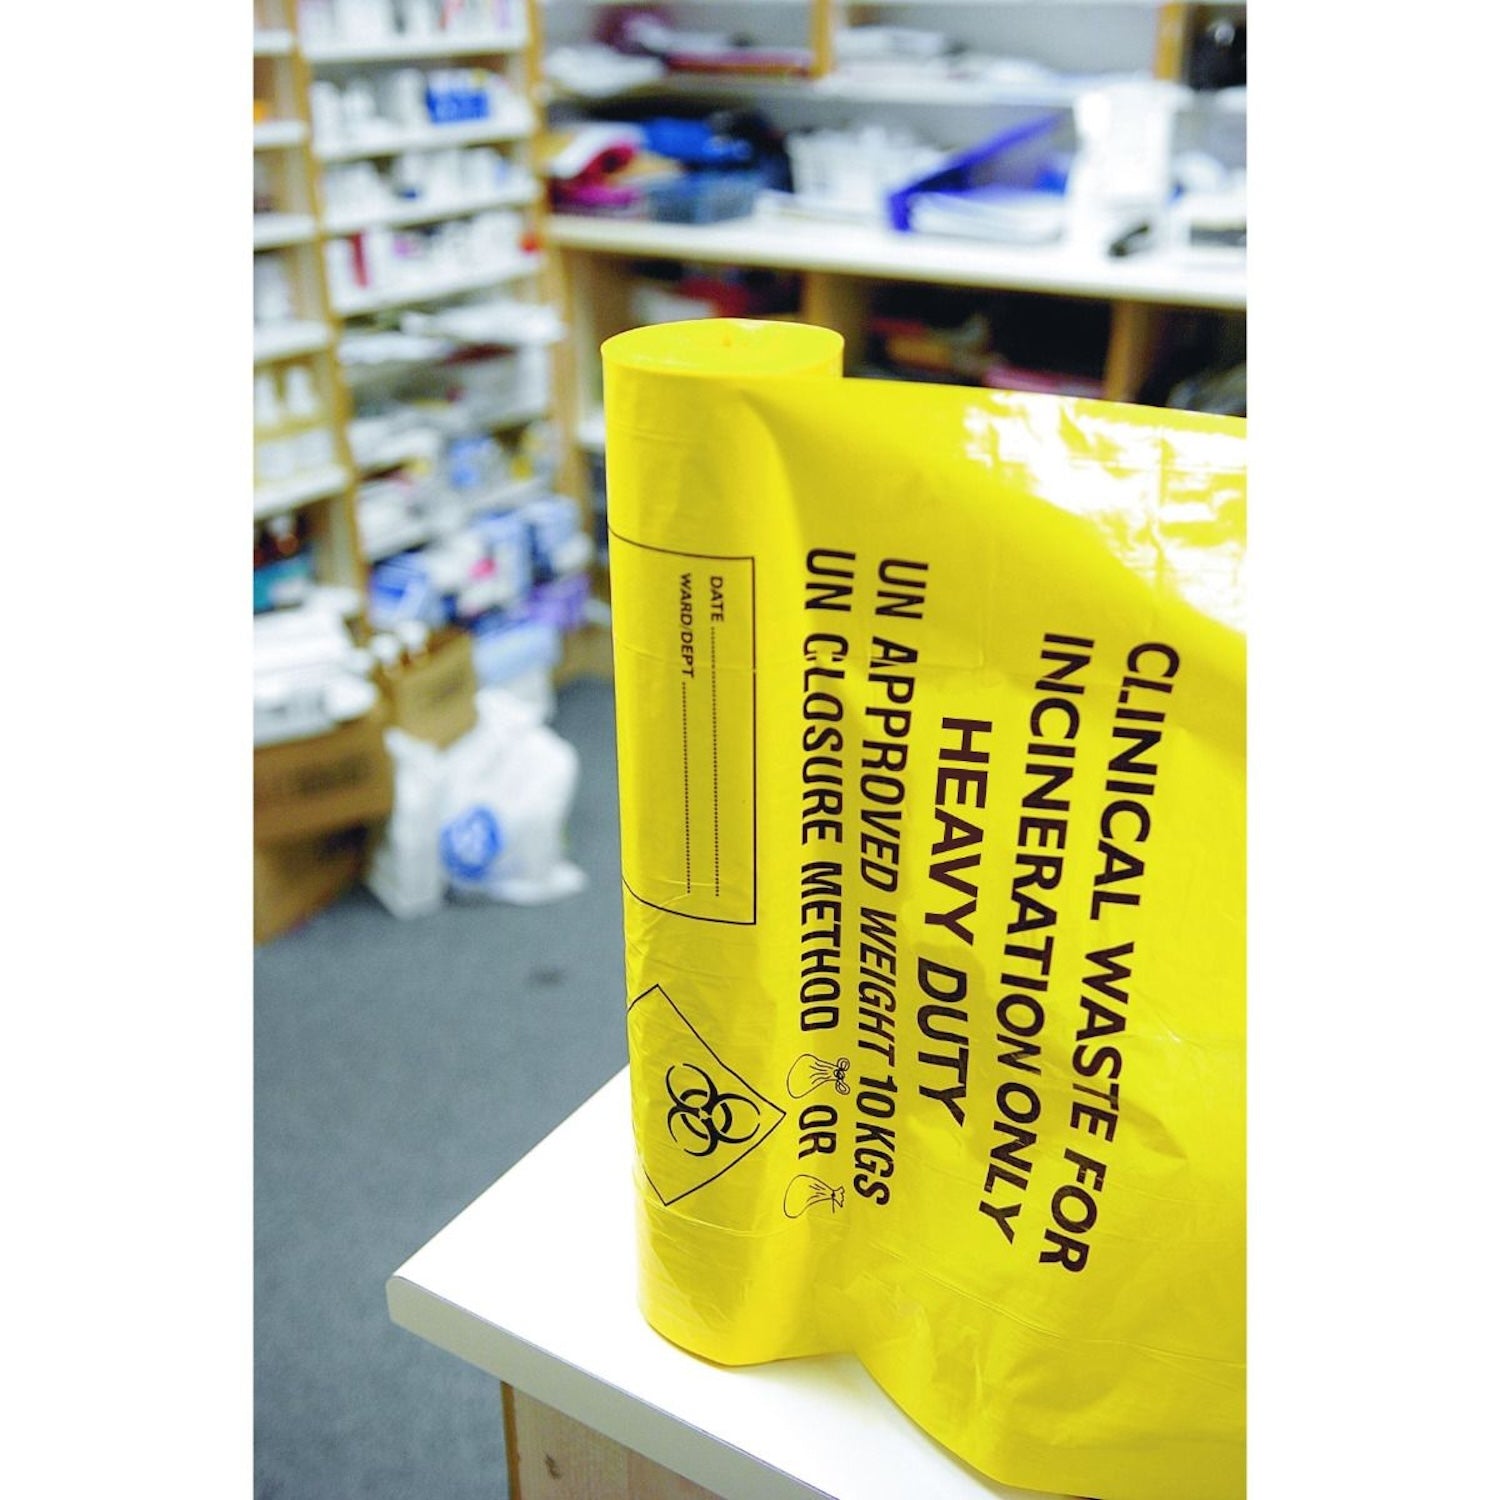 KleenMe Clinical Waste Sacks | Heavy Duty | Yellow | Roll of 25 (1)